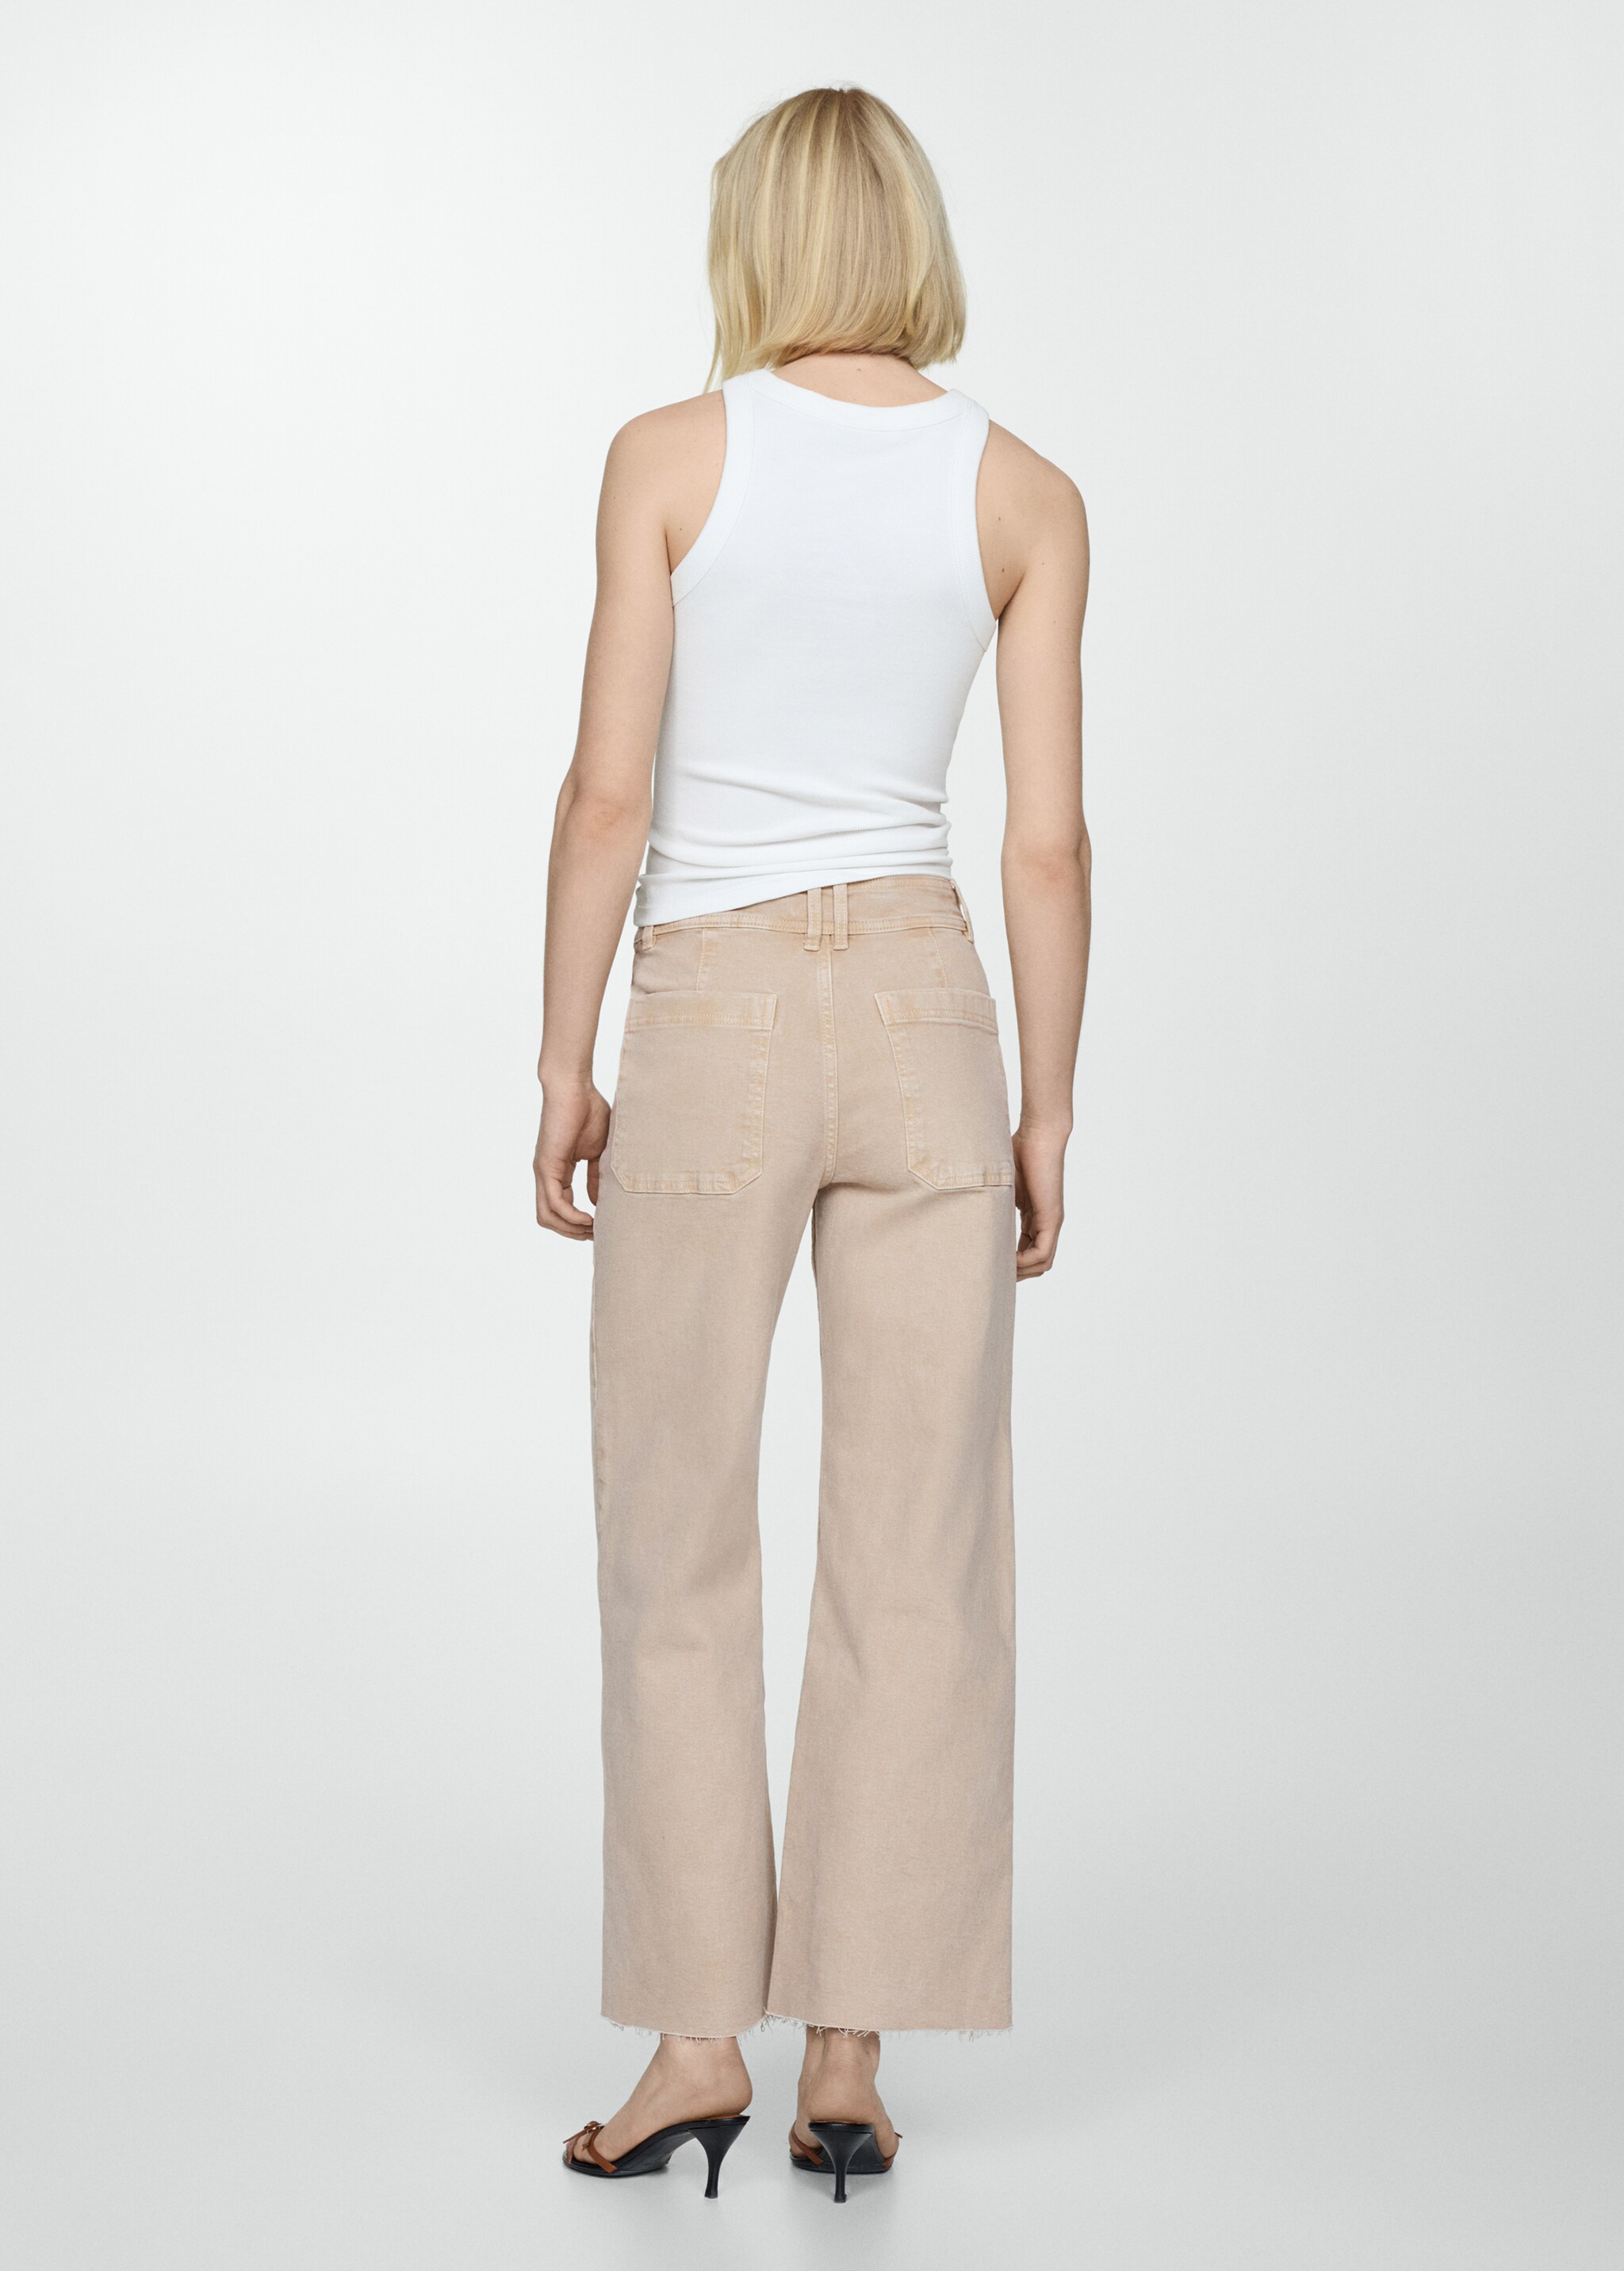 Catherin culotte high rise jeans - Reverse of the article